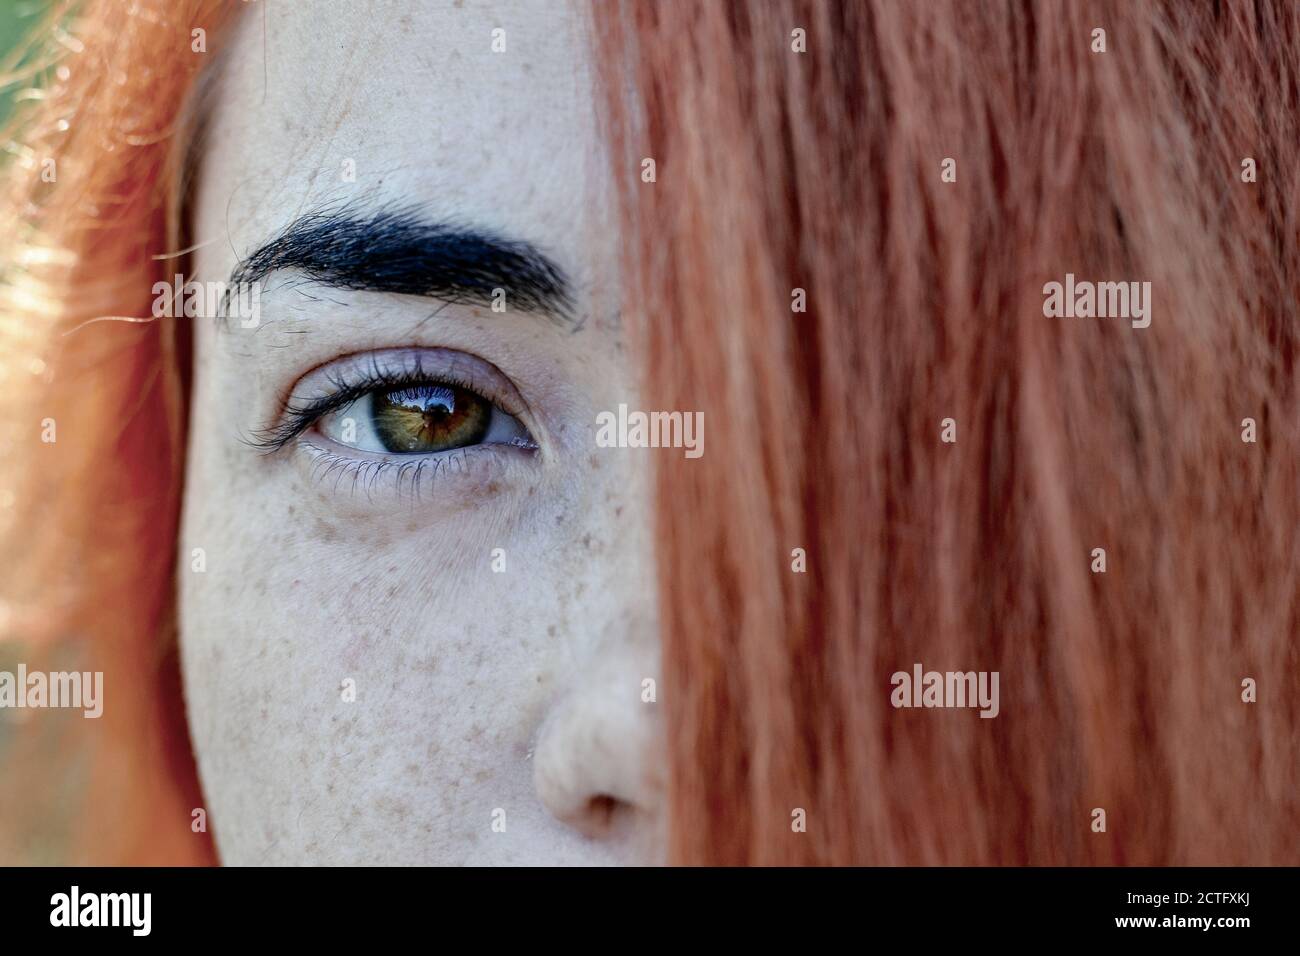 Close up portrait of a red hair woman girl with freckles. Portrait of a girl outdoors in sunlight. Hair covers half of the face. Stock Photo